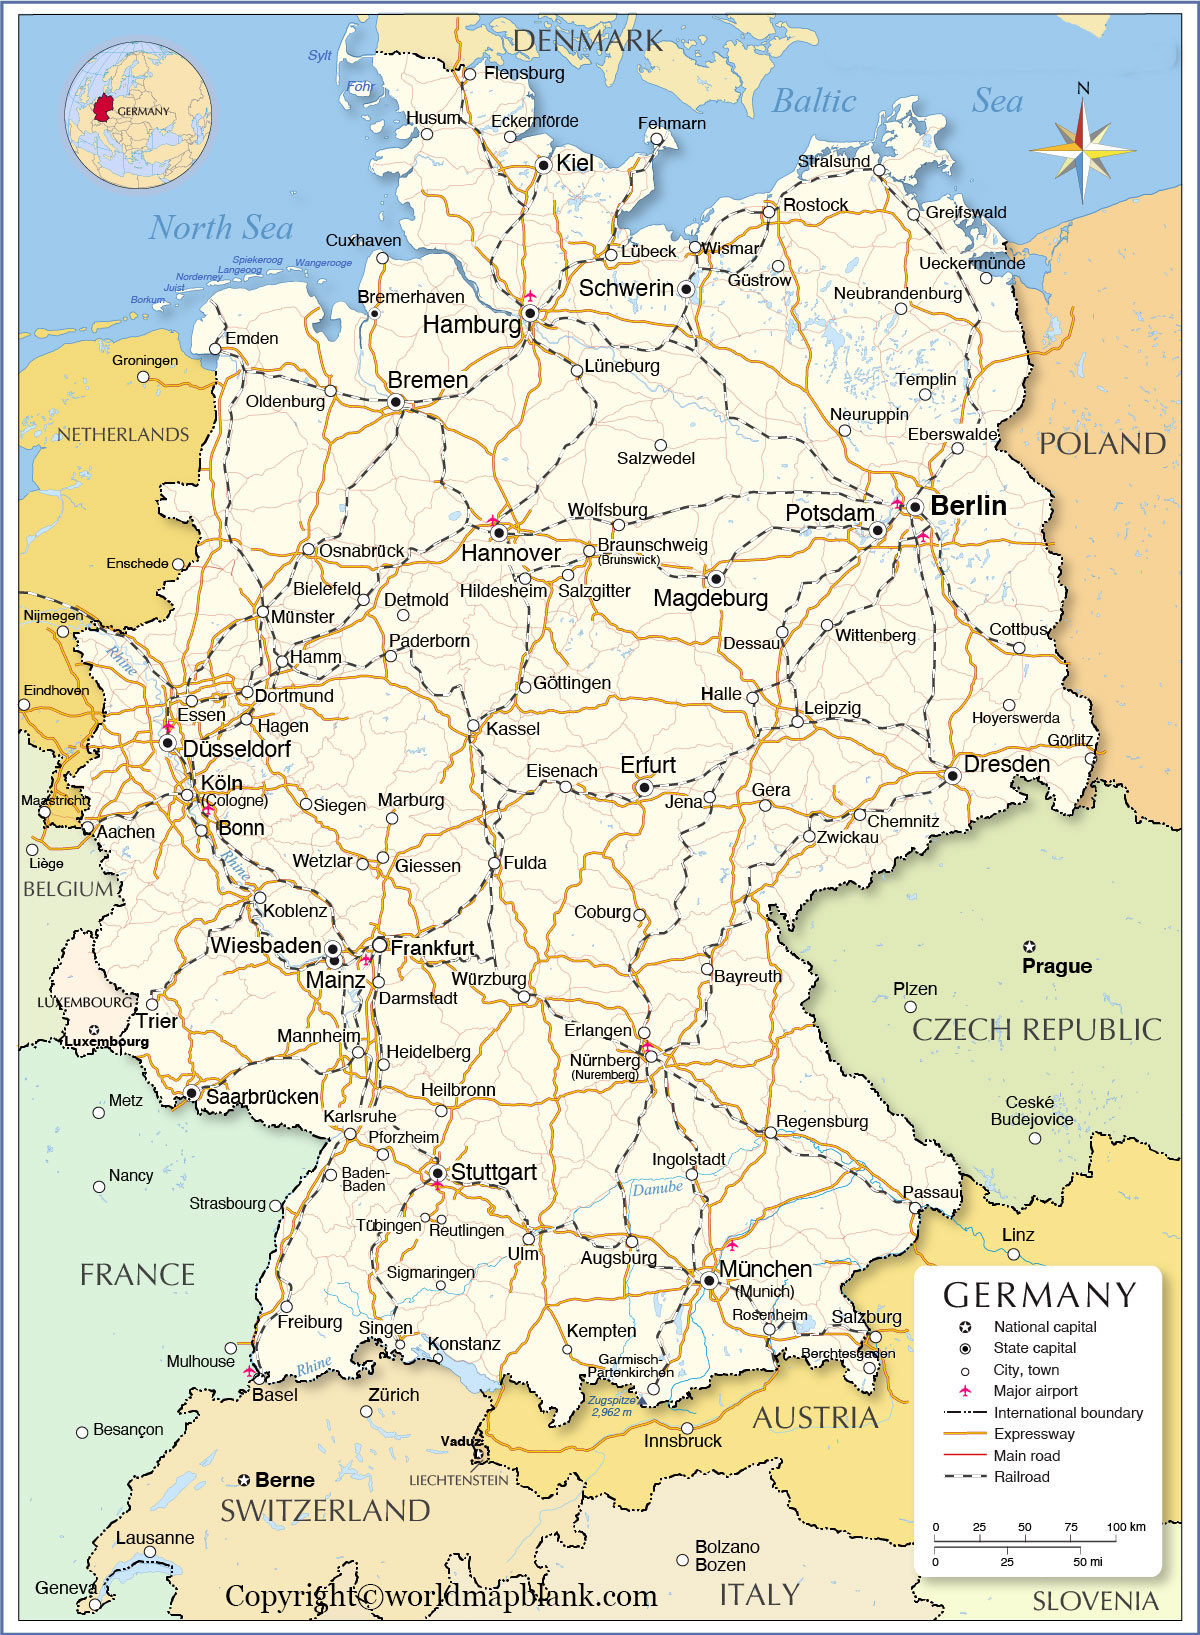 Labeled Map of Germany with Cities